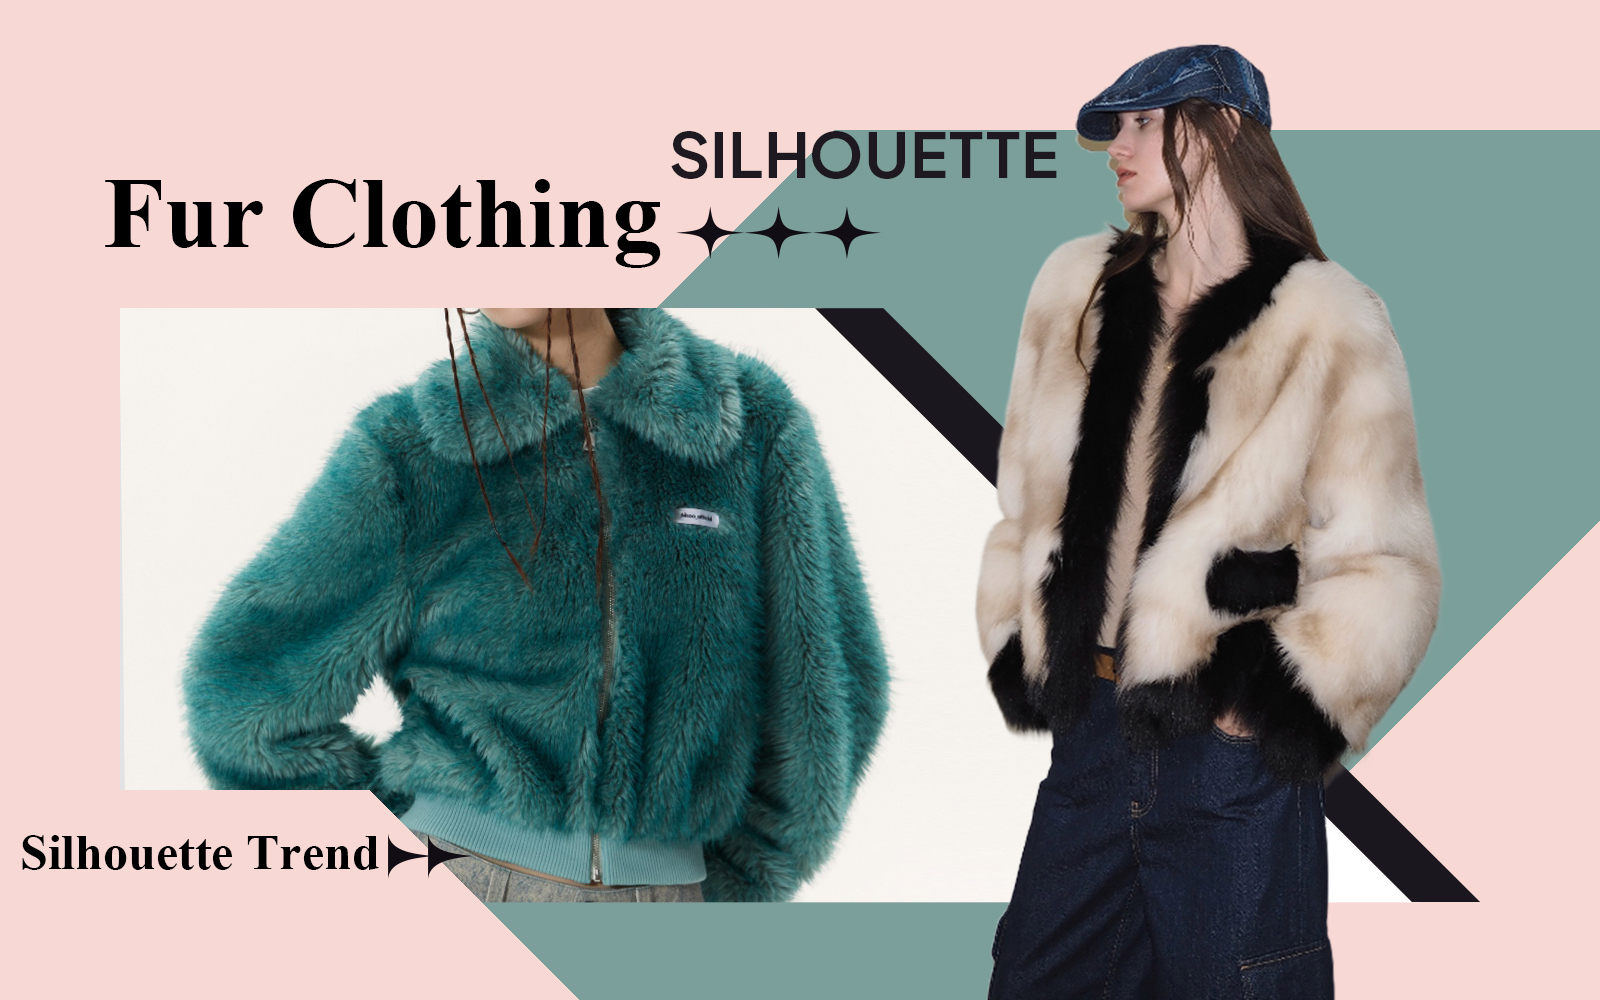 Light Oxygen Intelligence -- The Silhouette Trend for Women's Fur Clothing